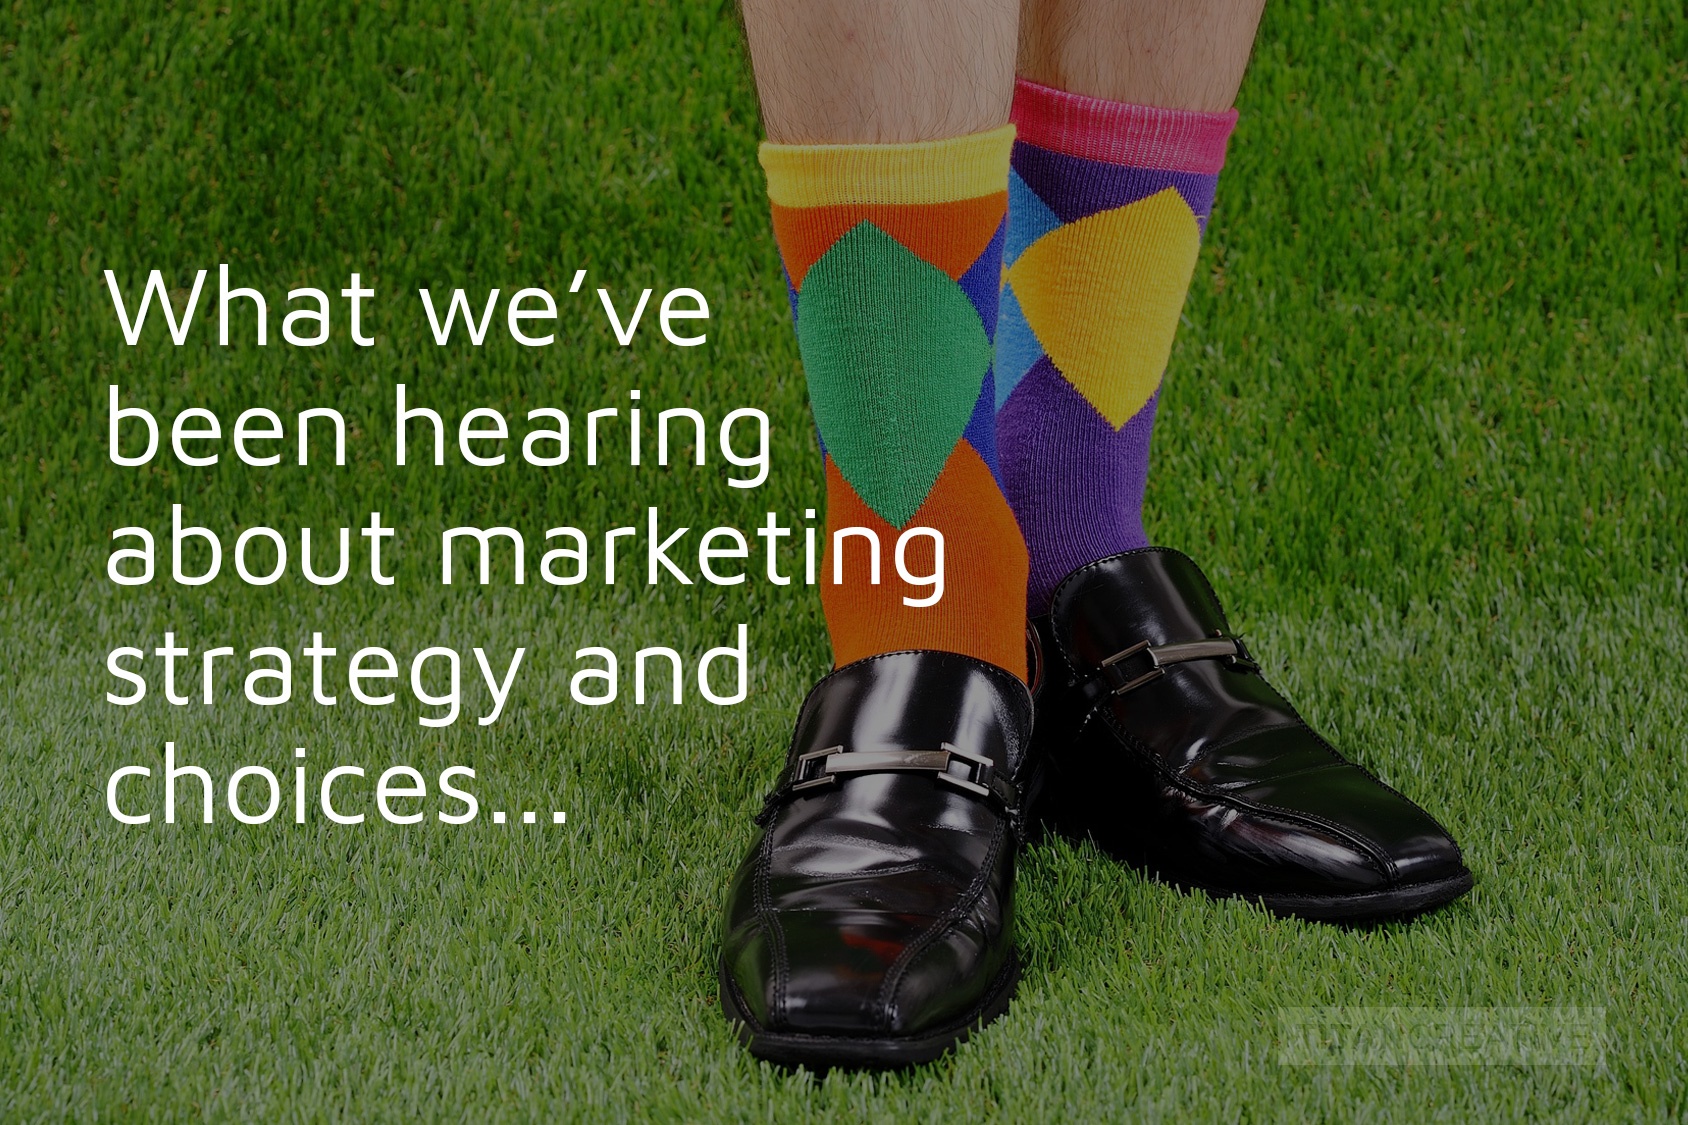 What we've been hearing about marketing strategy and choices...